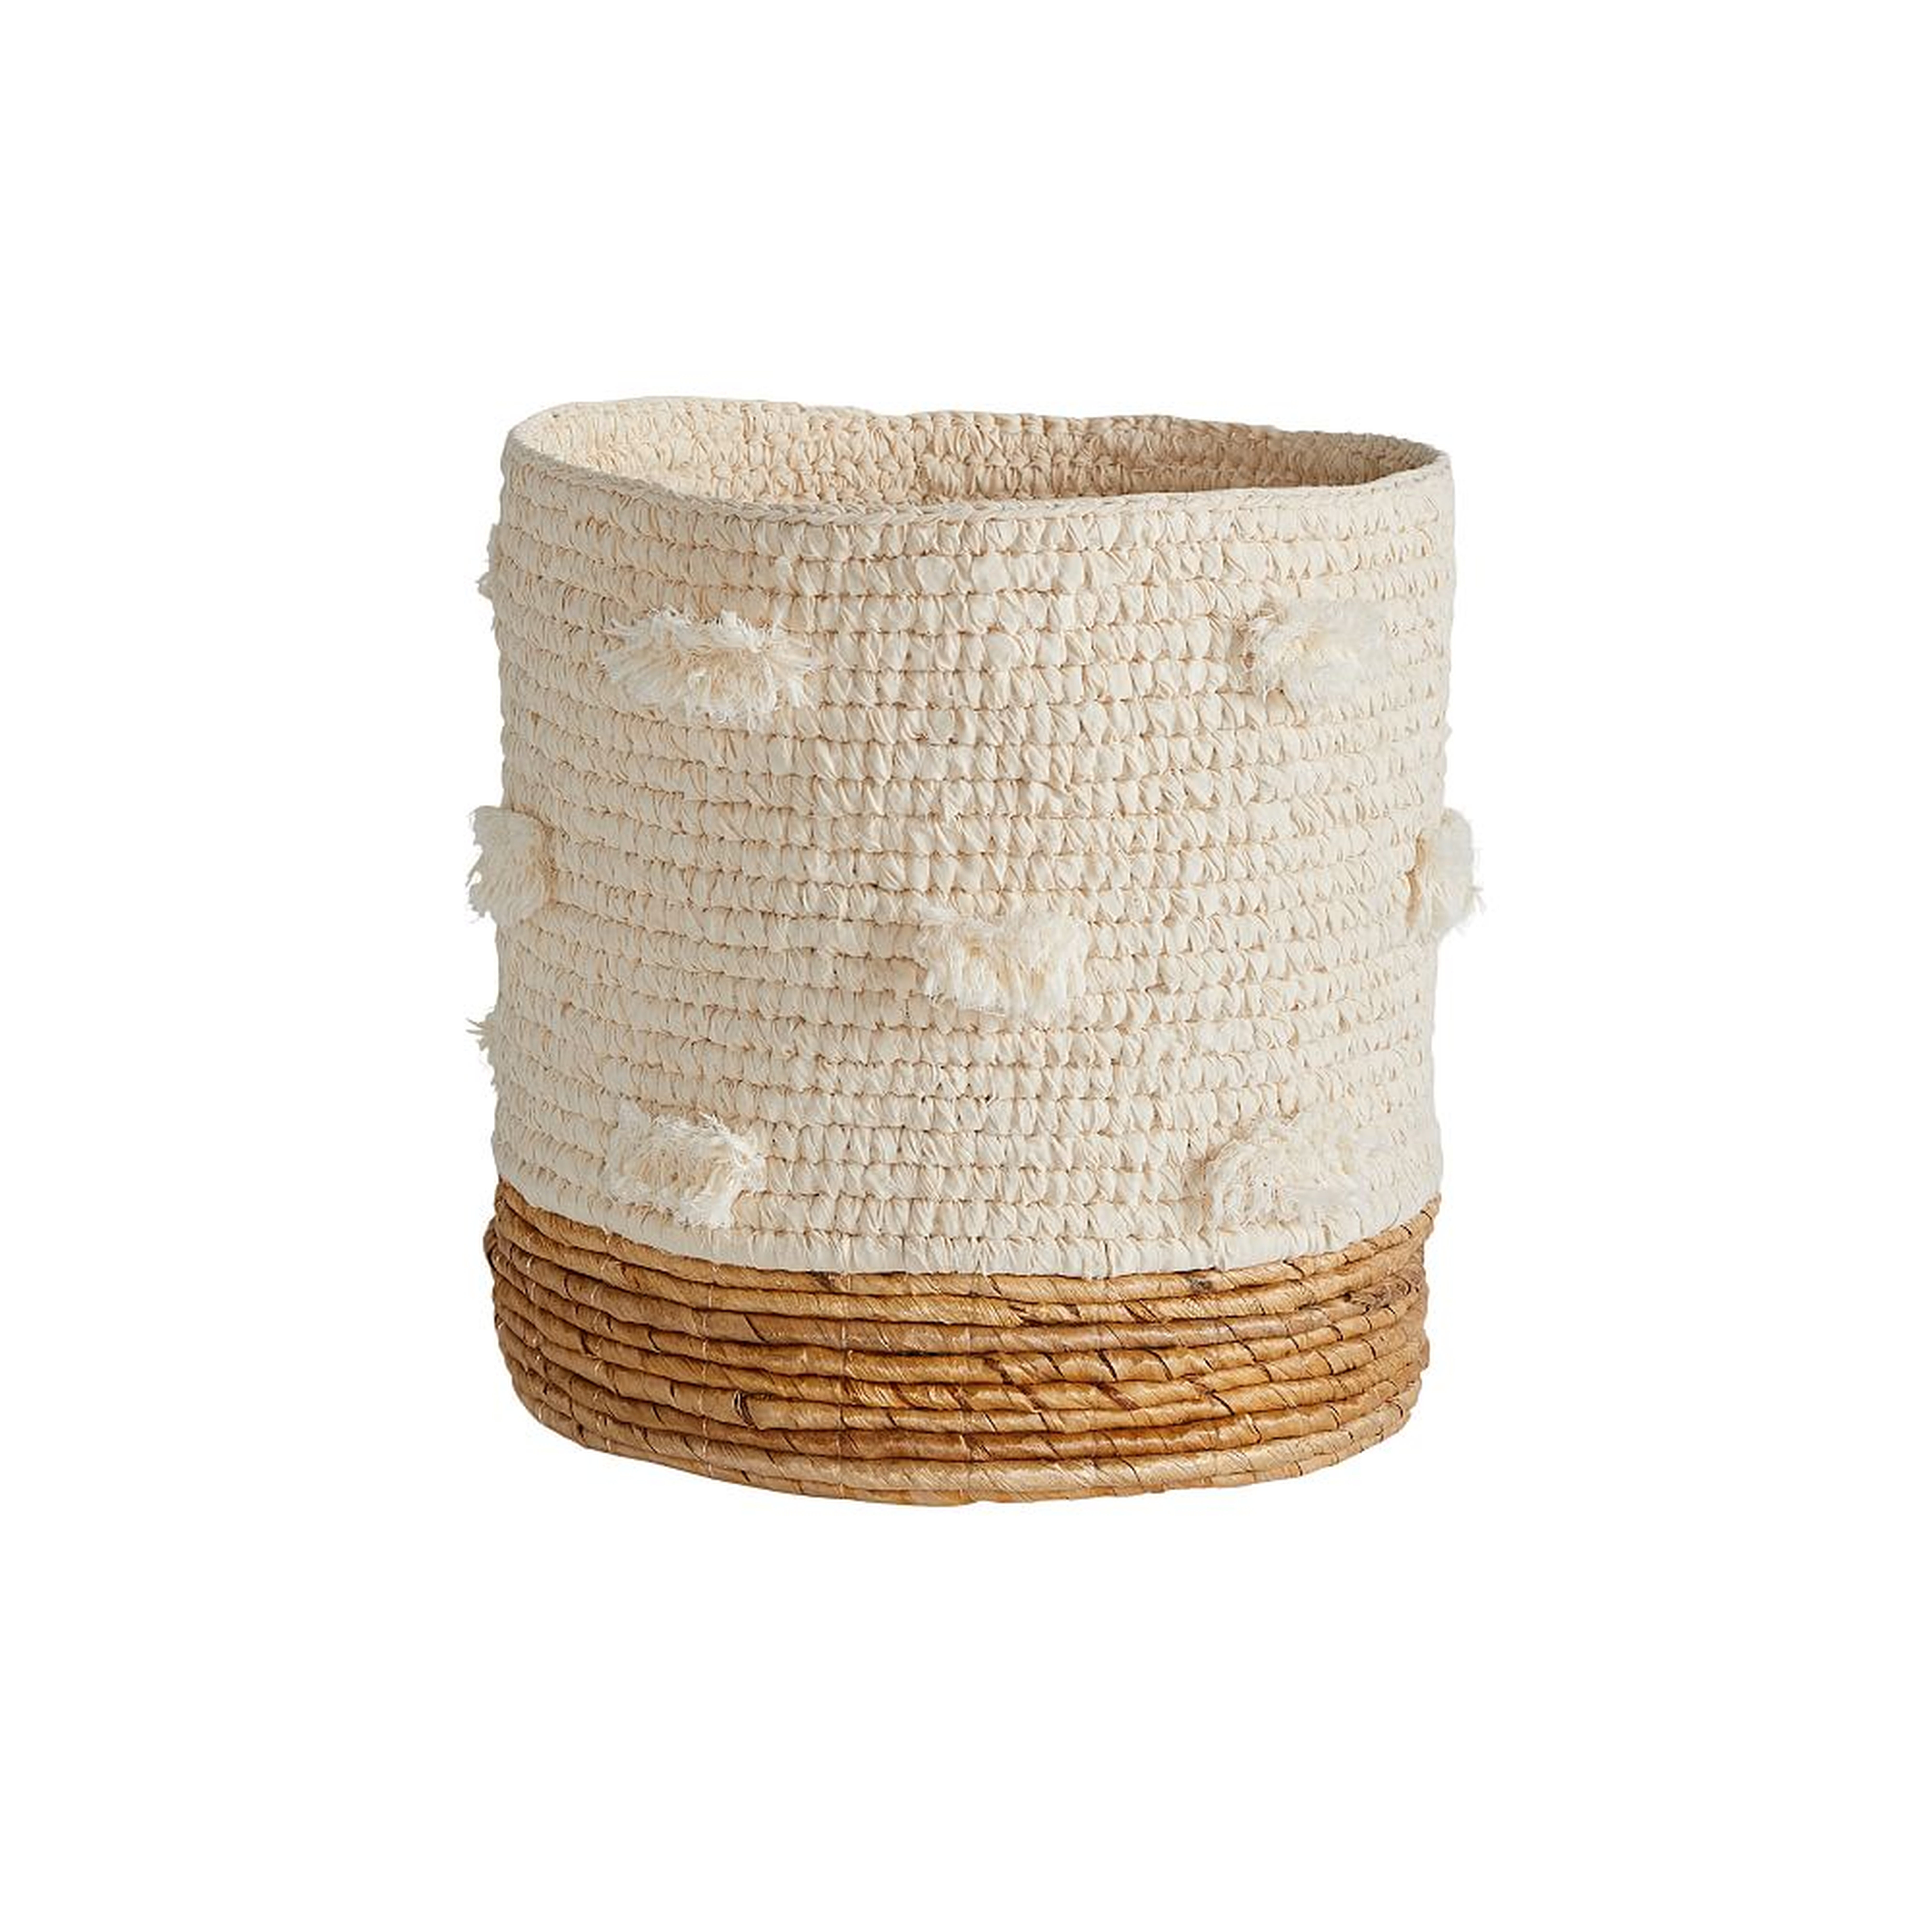 Recycled Cotton Storage, Catchall - Pottery Barn Teen